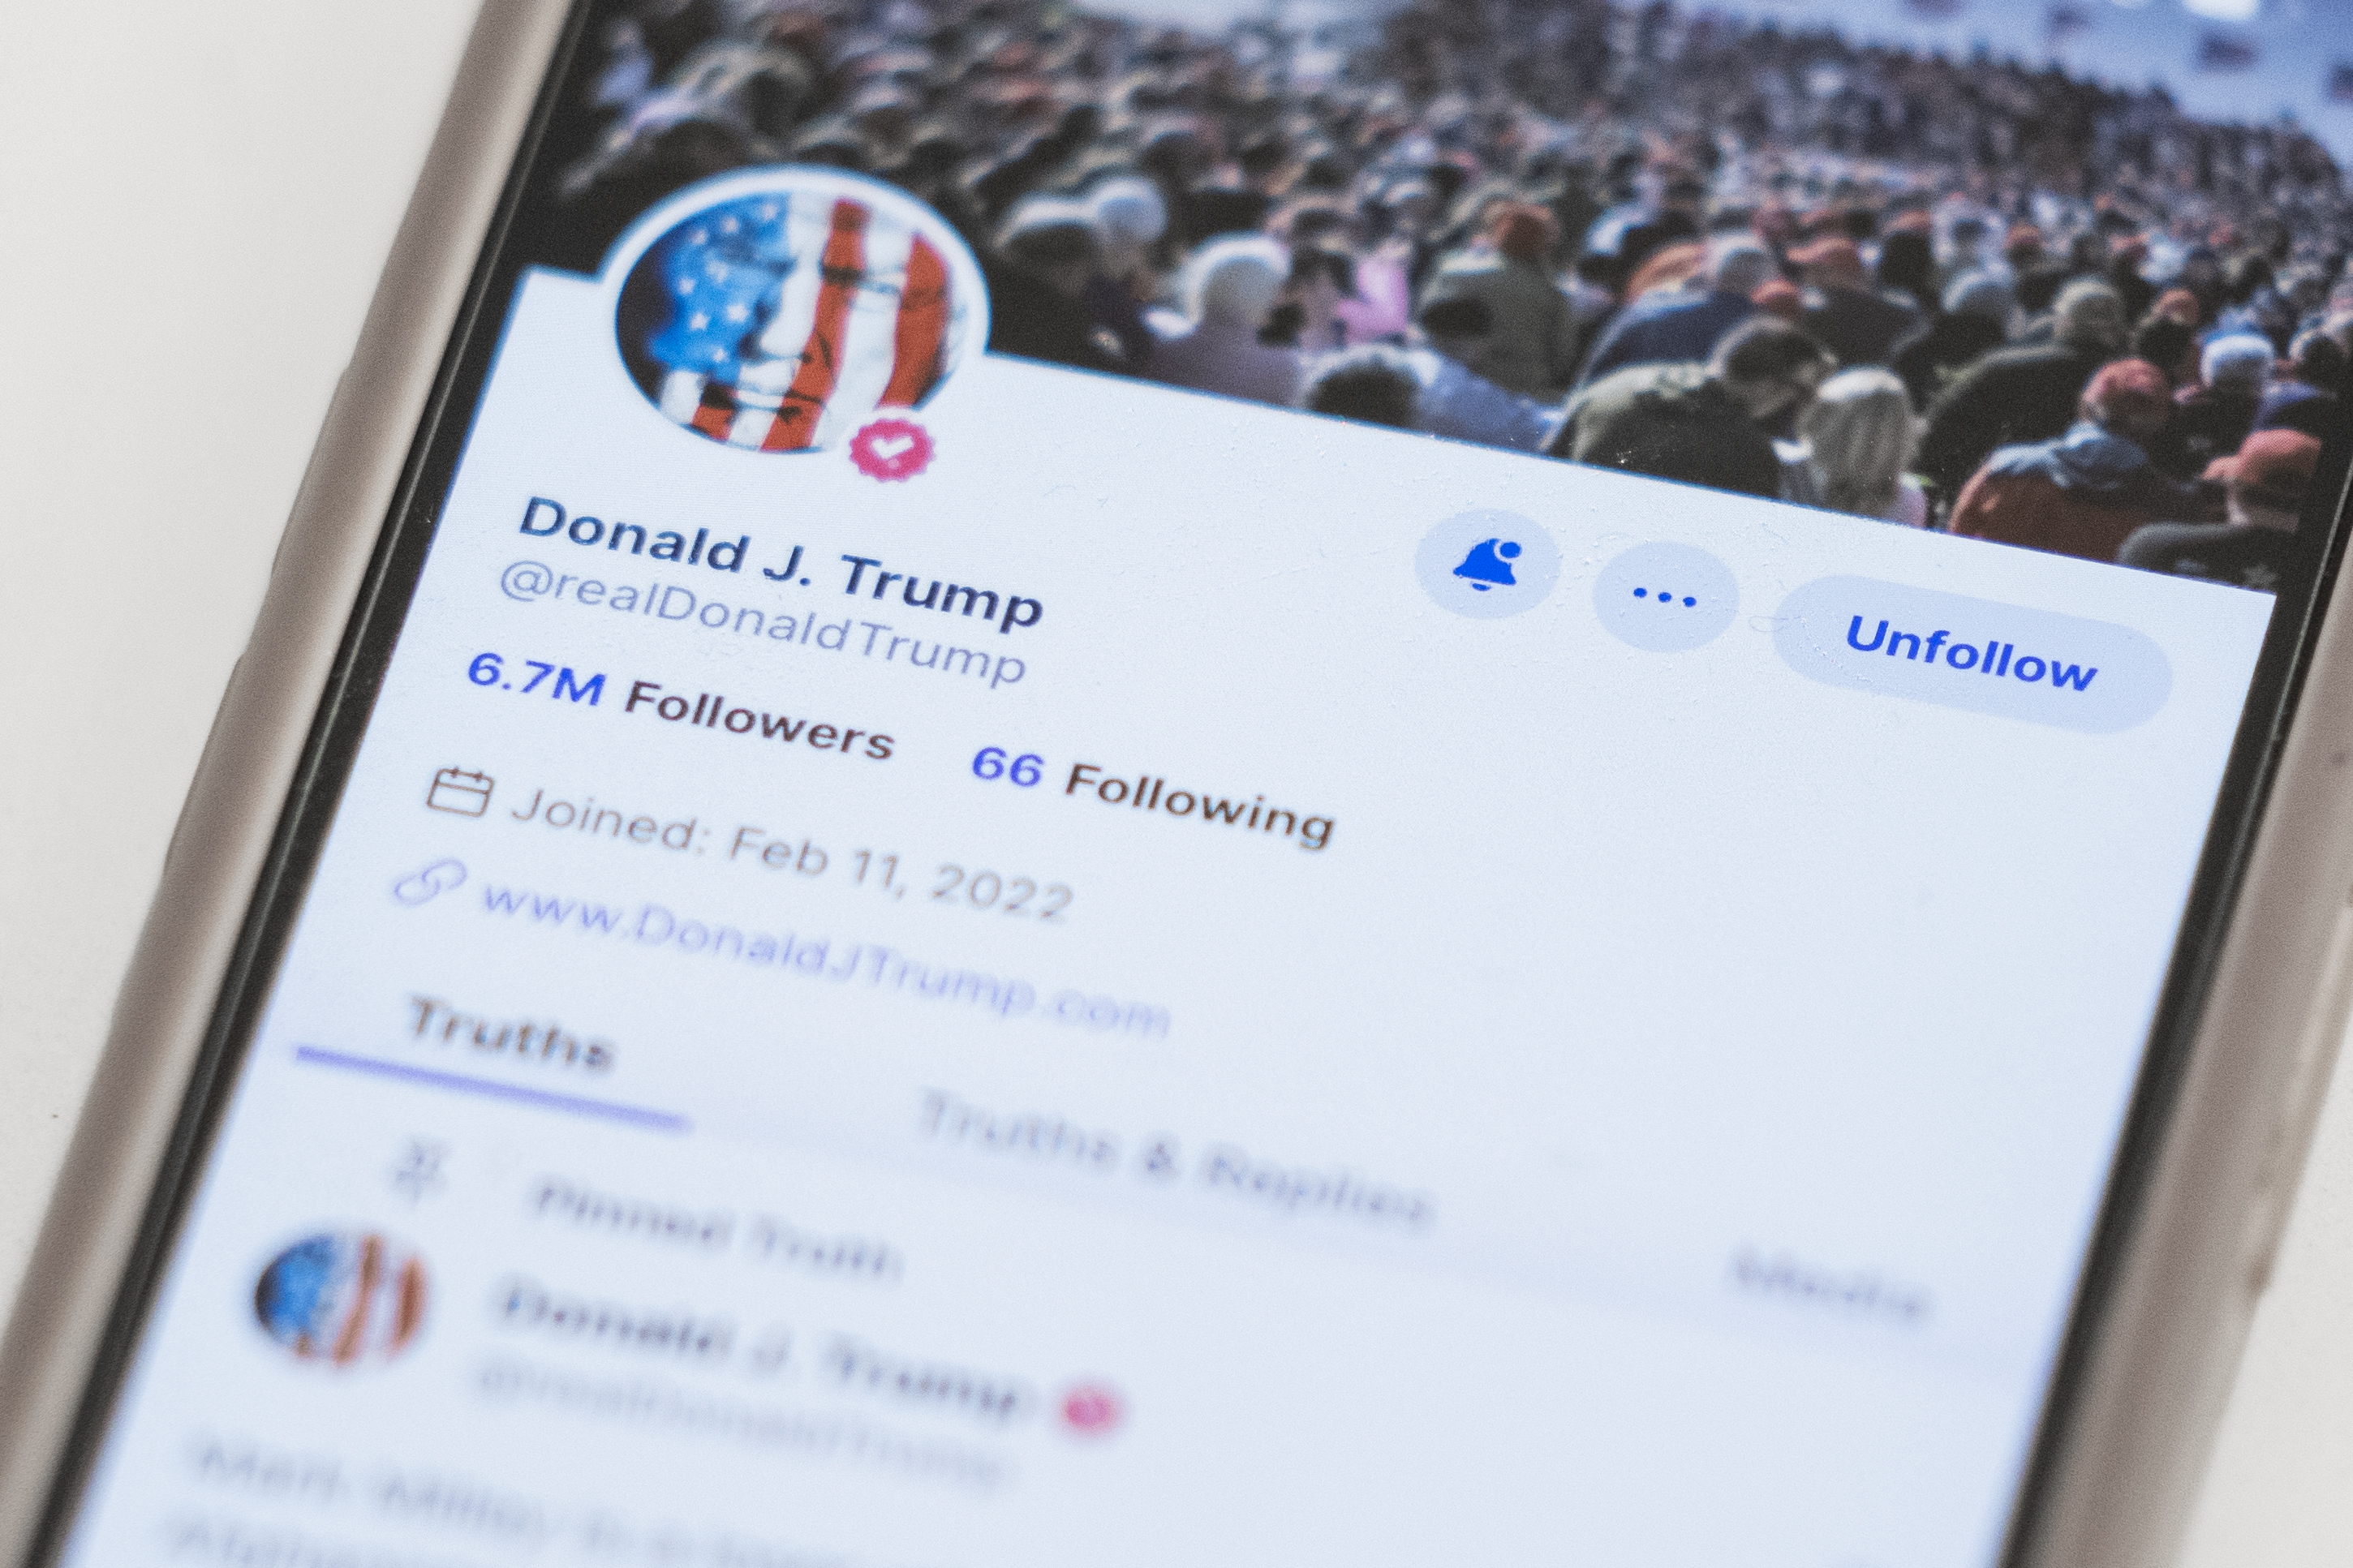 Truth Social is Trump’s personally owned equivalent of Twitter